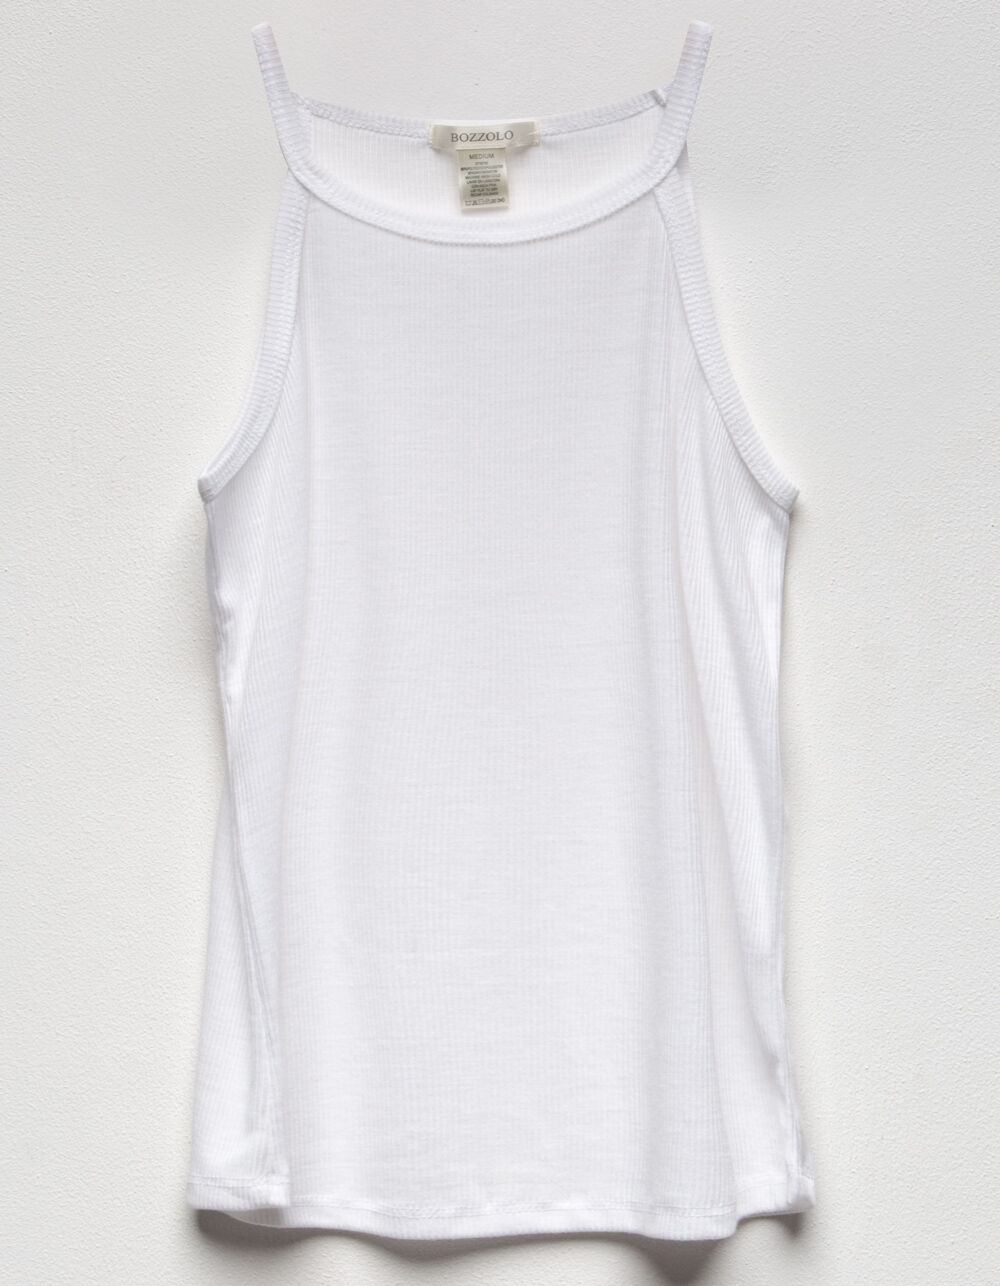 BOZZOLO High Neck Girls Tank image number 0